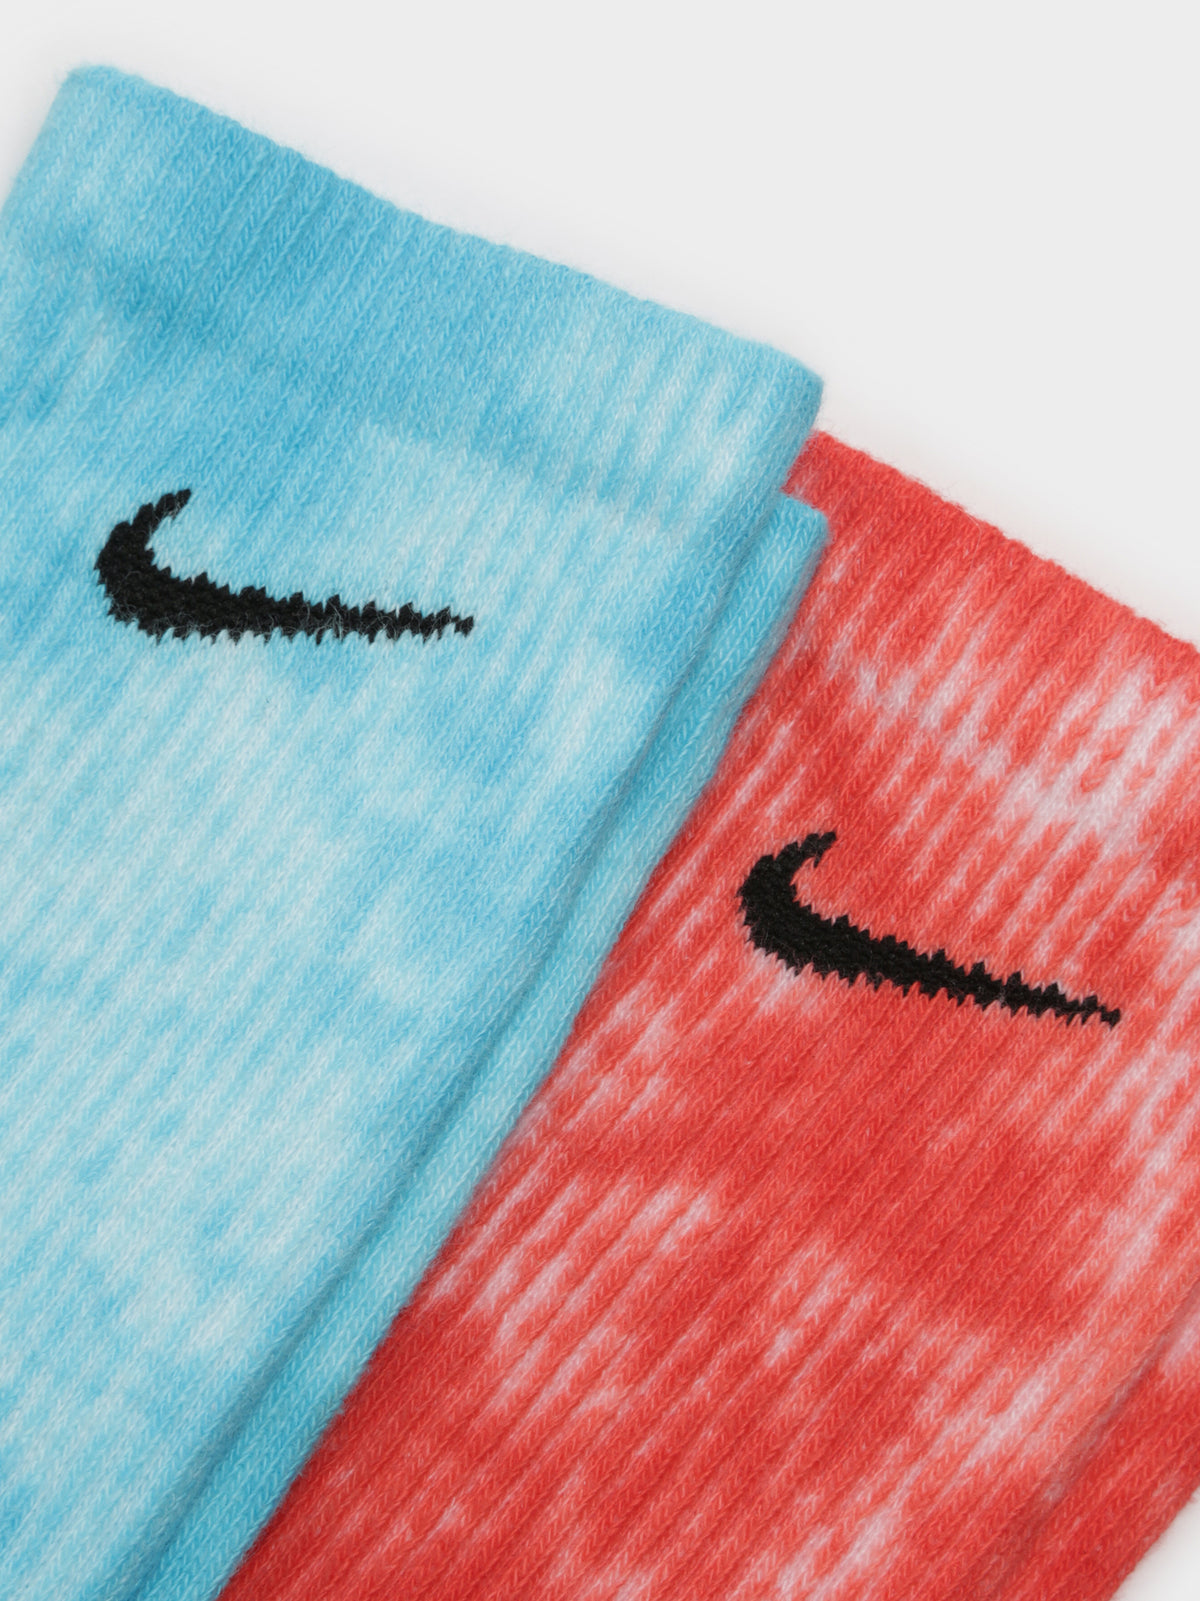 2 Pairs of Everyday Cushioned Crew Socks in Blue &amp; Red Tie-Dye